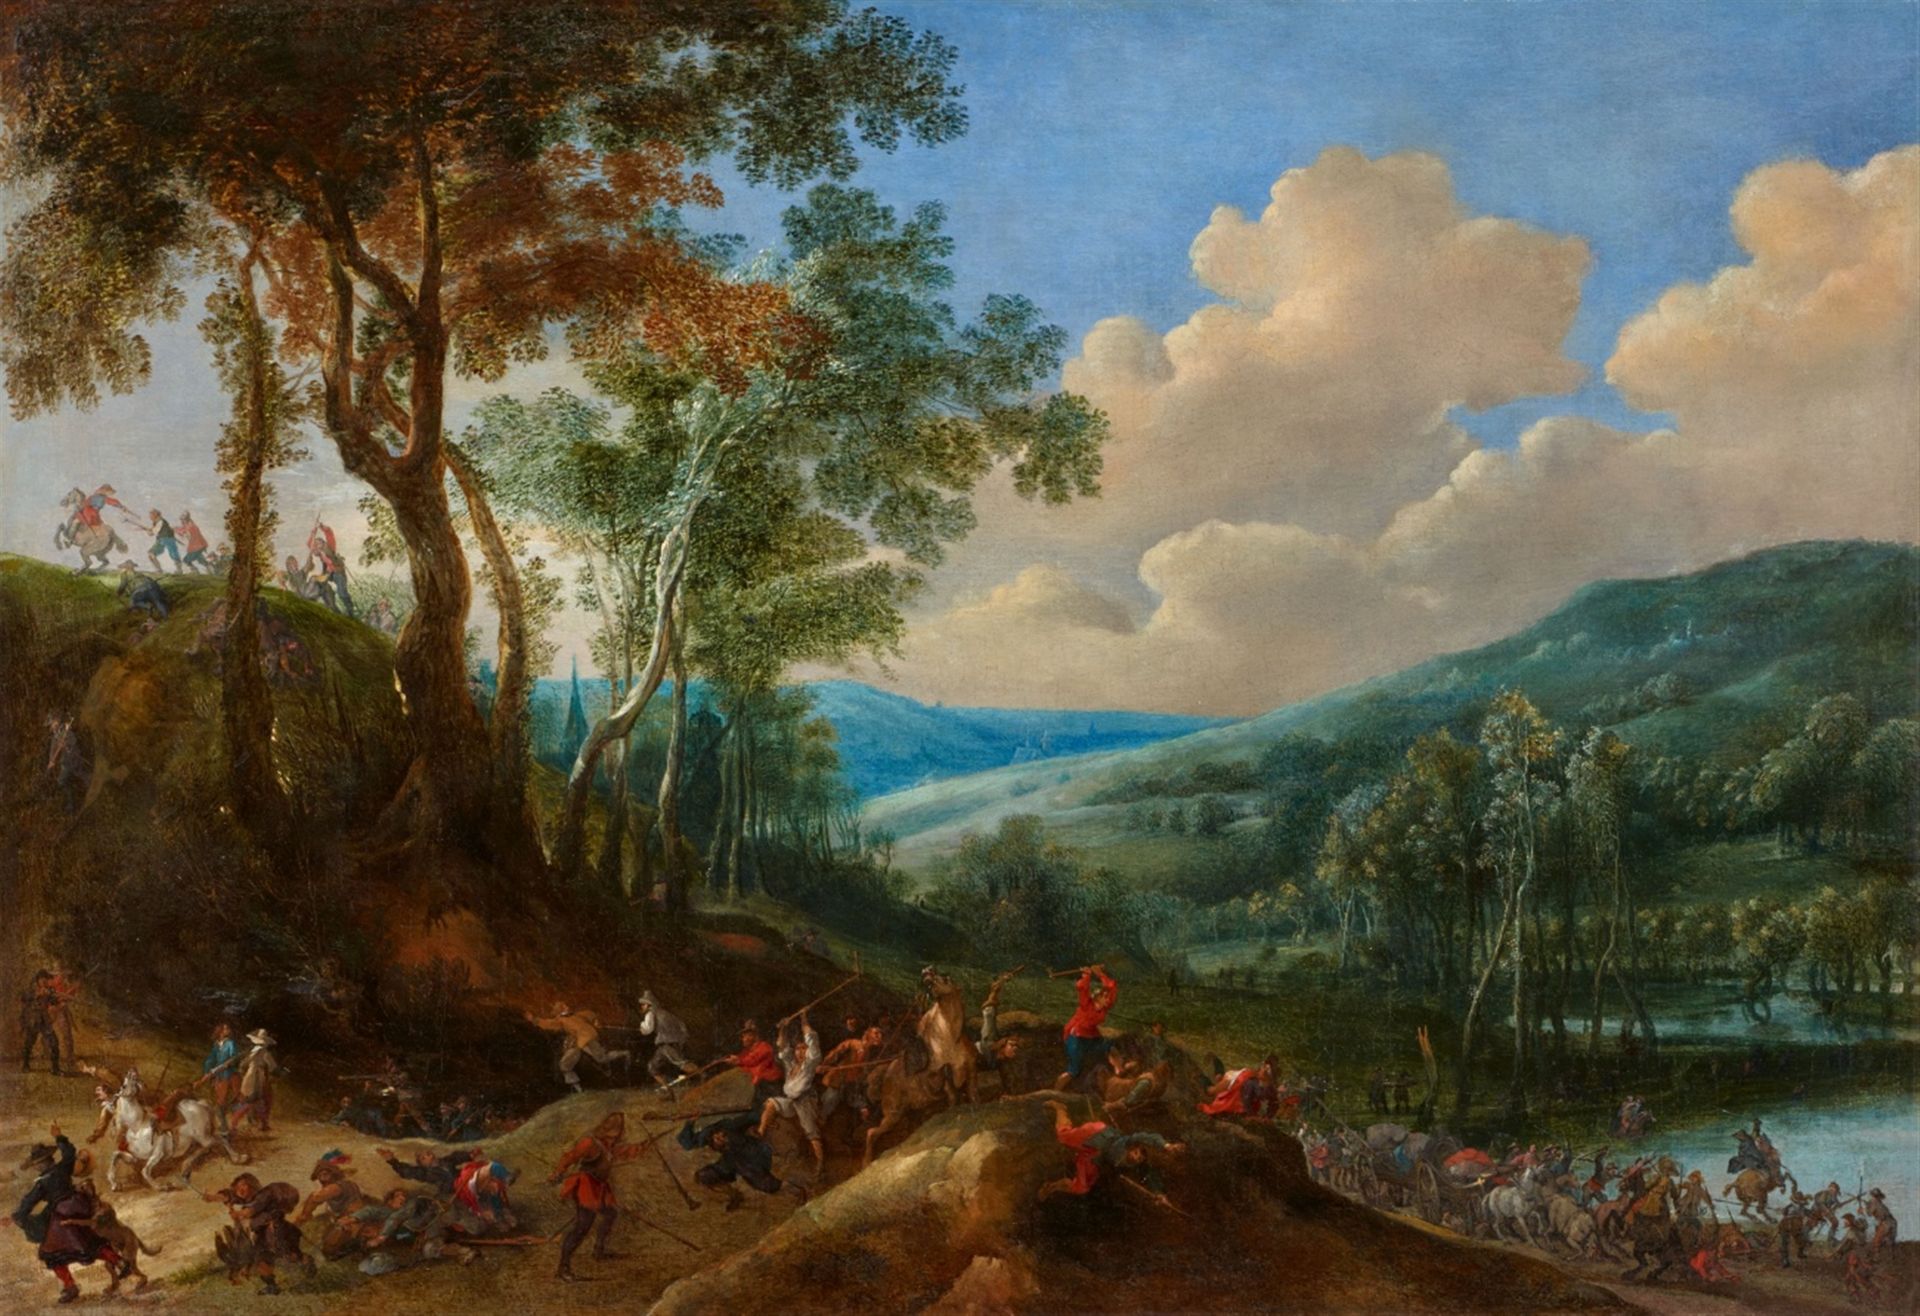 Pieter Snayers, Ambush in a Hilly Landscape